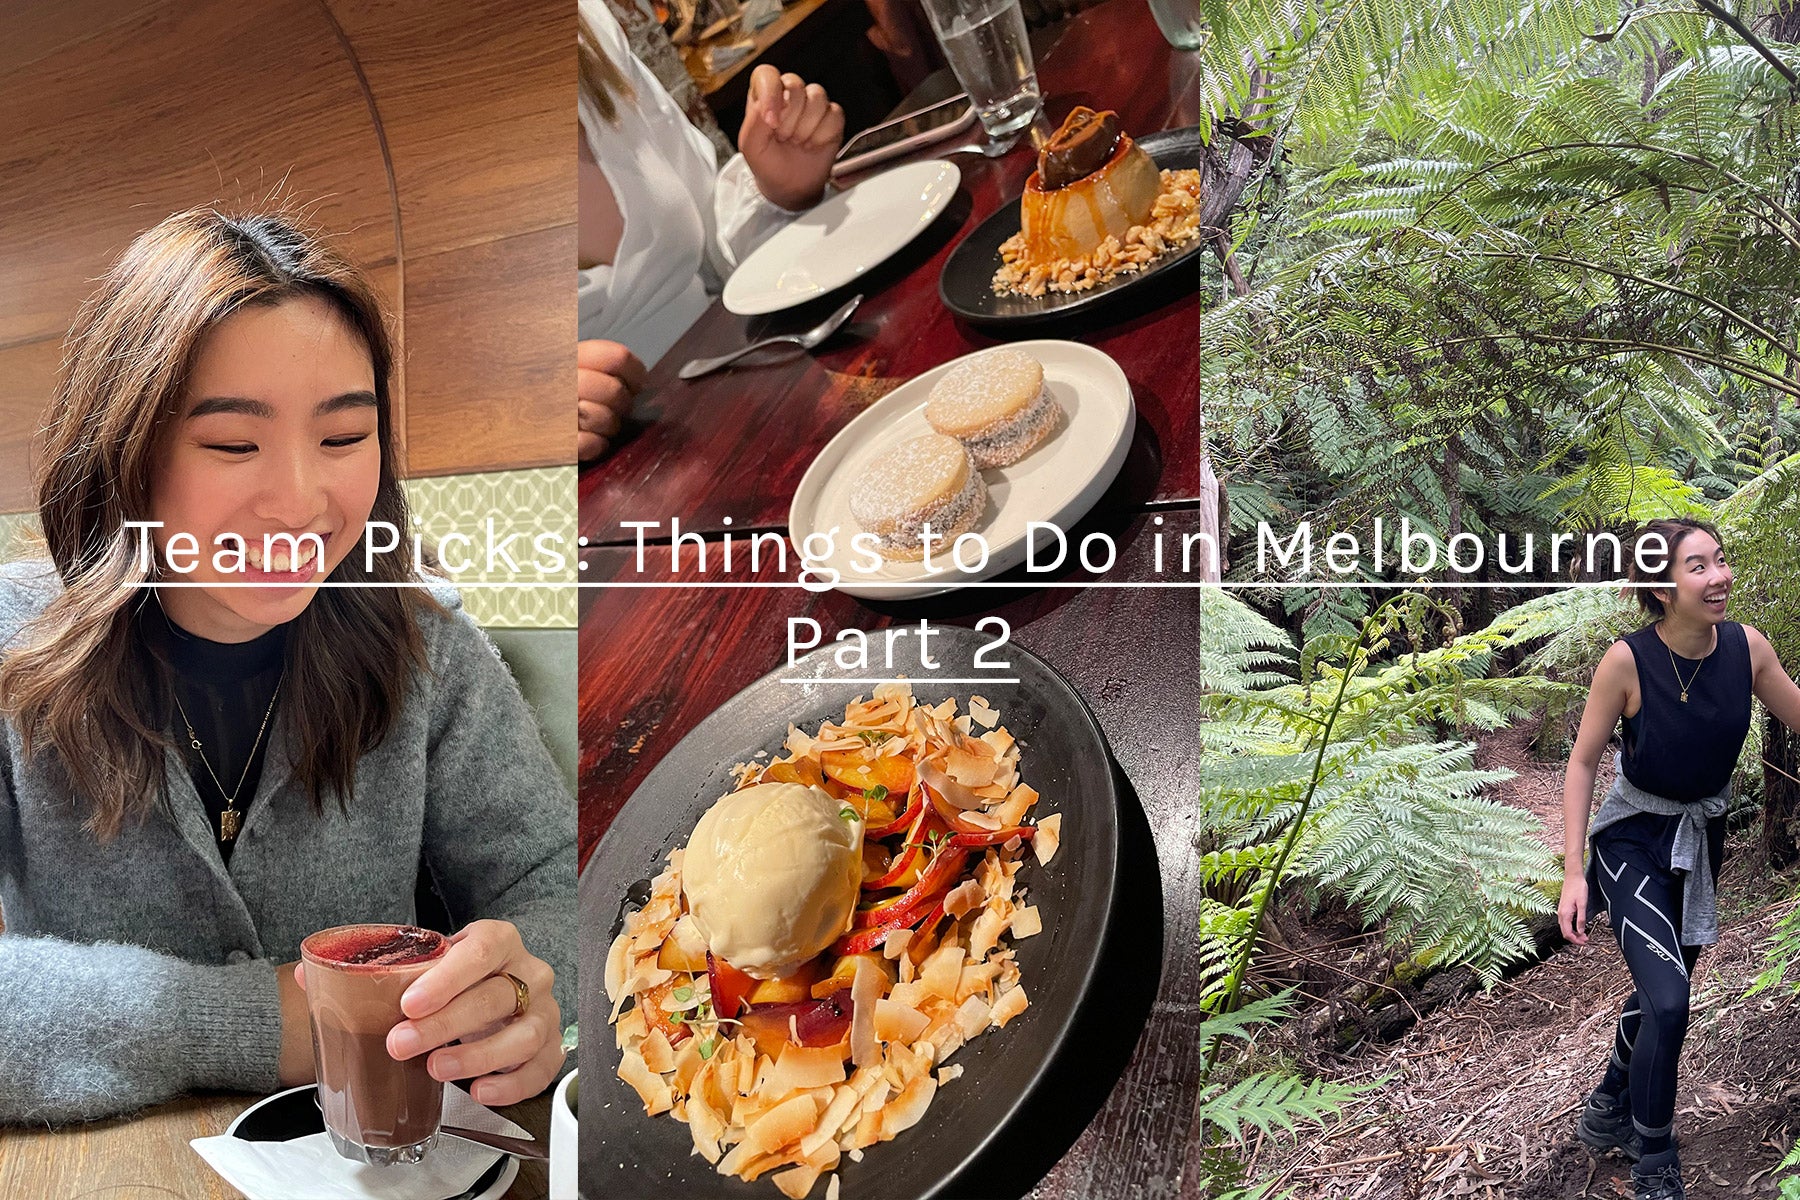 Our Team Picks: Things to Do In Melbourne Part 2